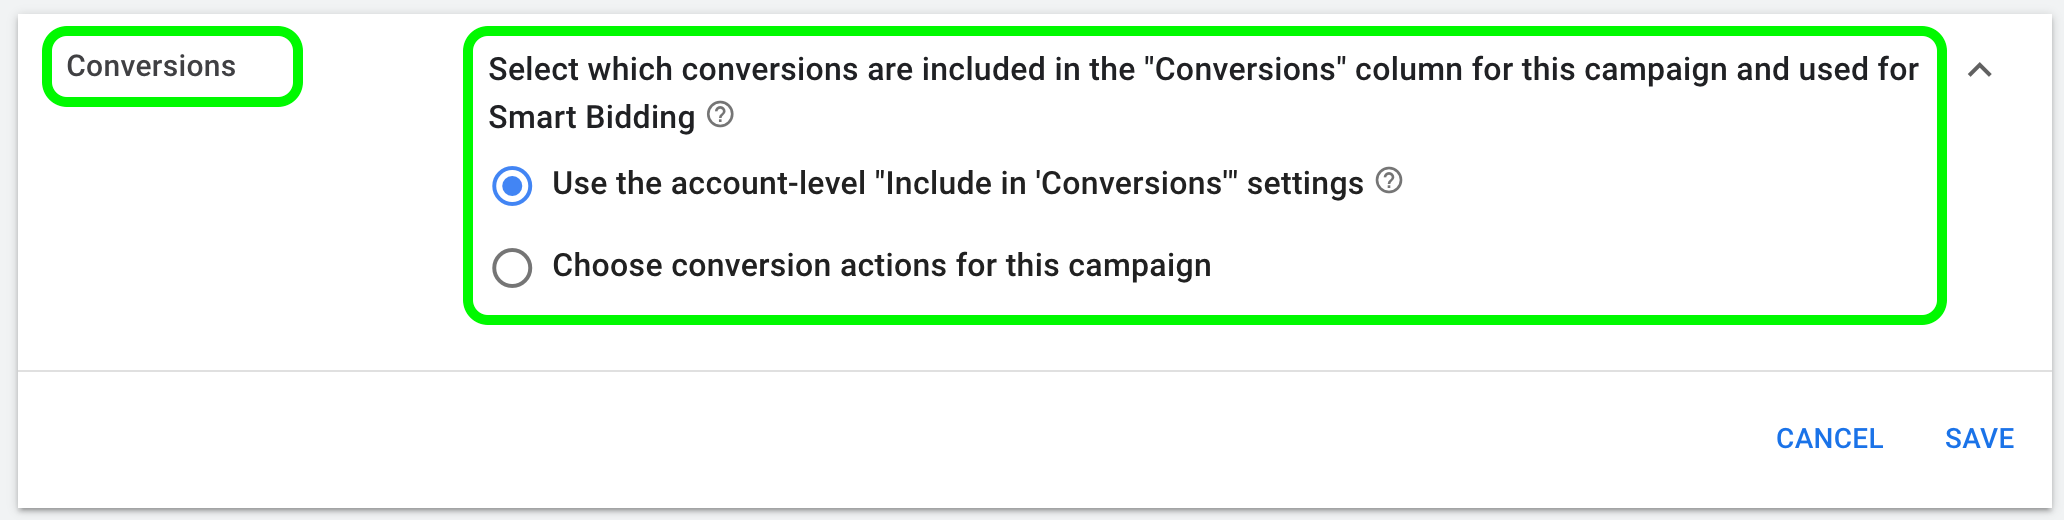 Conversion settings in google ads